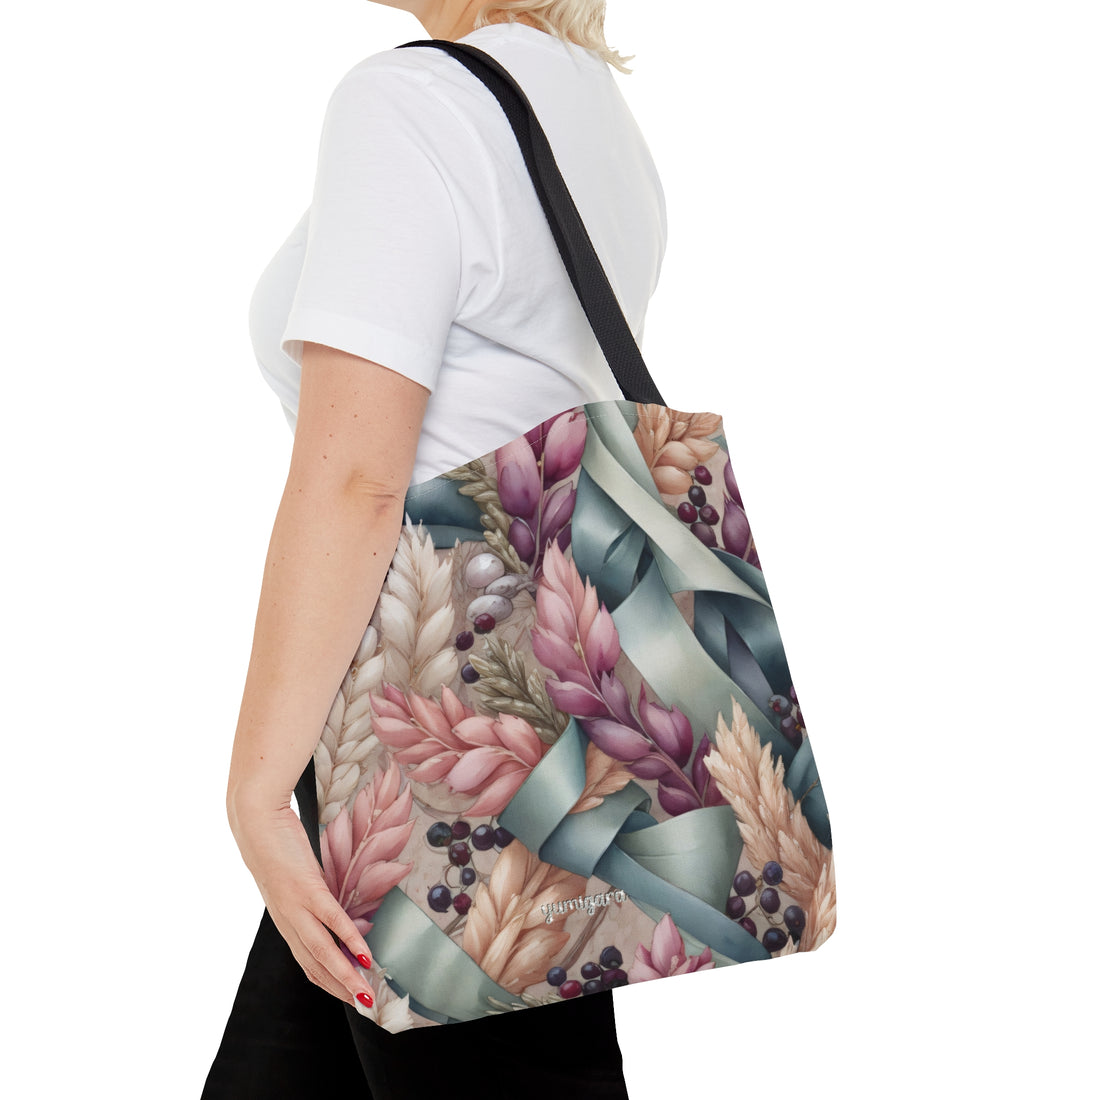 Sweet Delight and Dreams Luxury Shopping Tote Bag